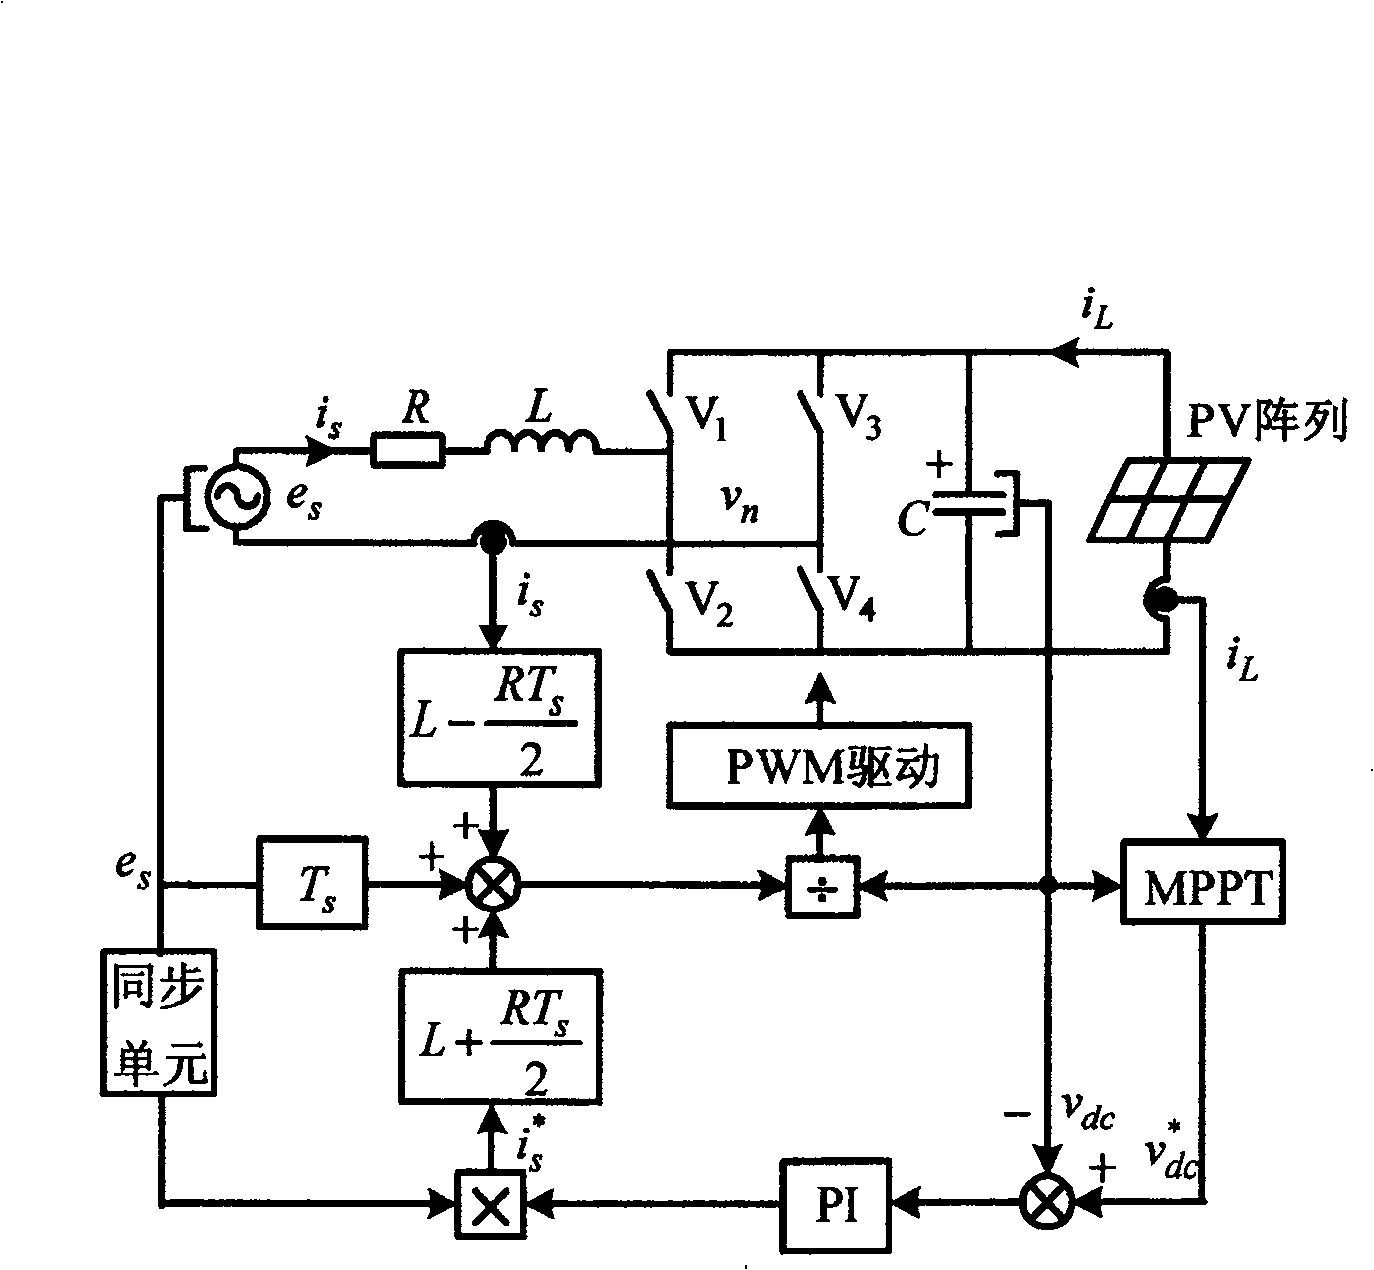 A method of photovoltaic grid-connected inversion